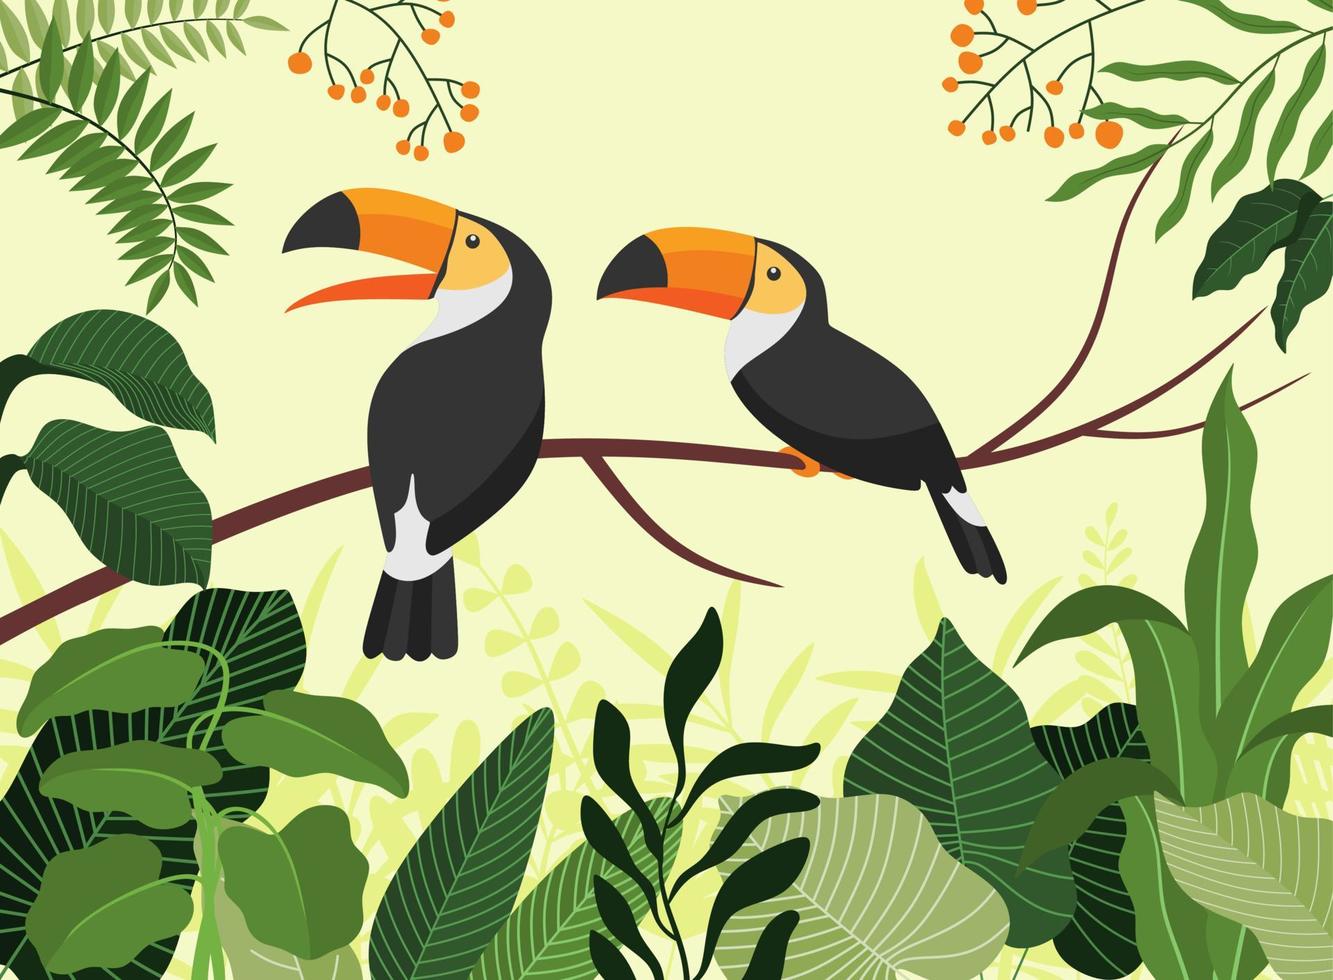 toucan birds on tropical branches with leaves. vector